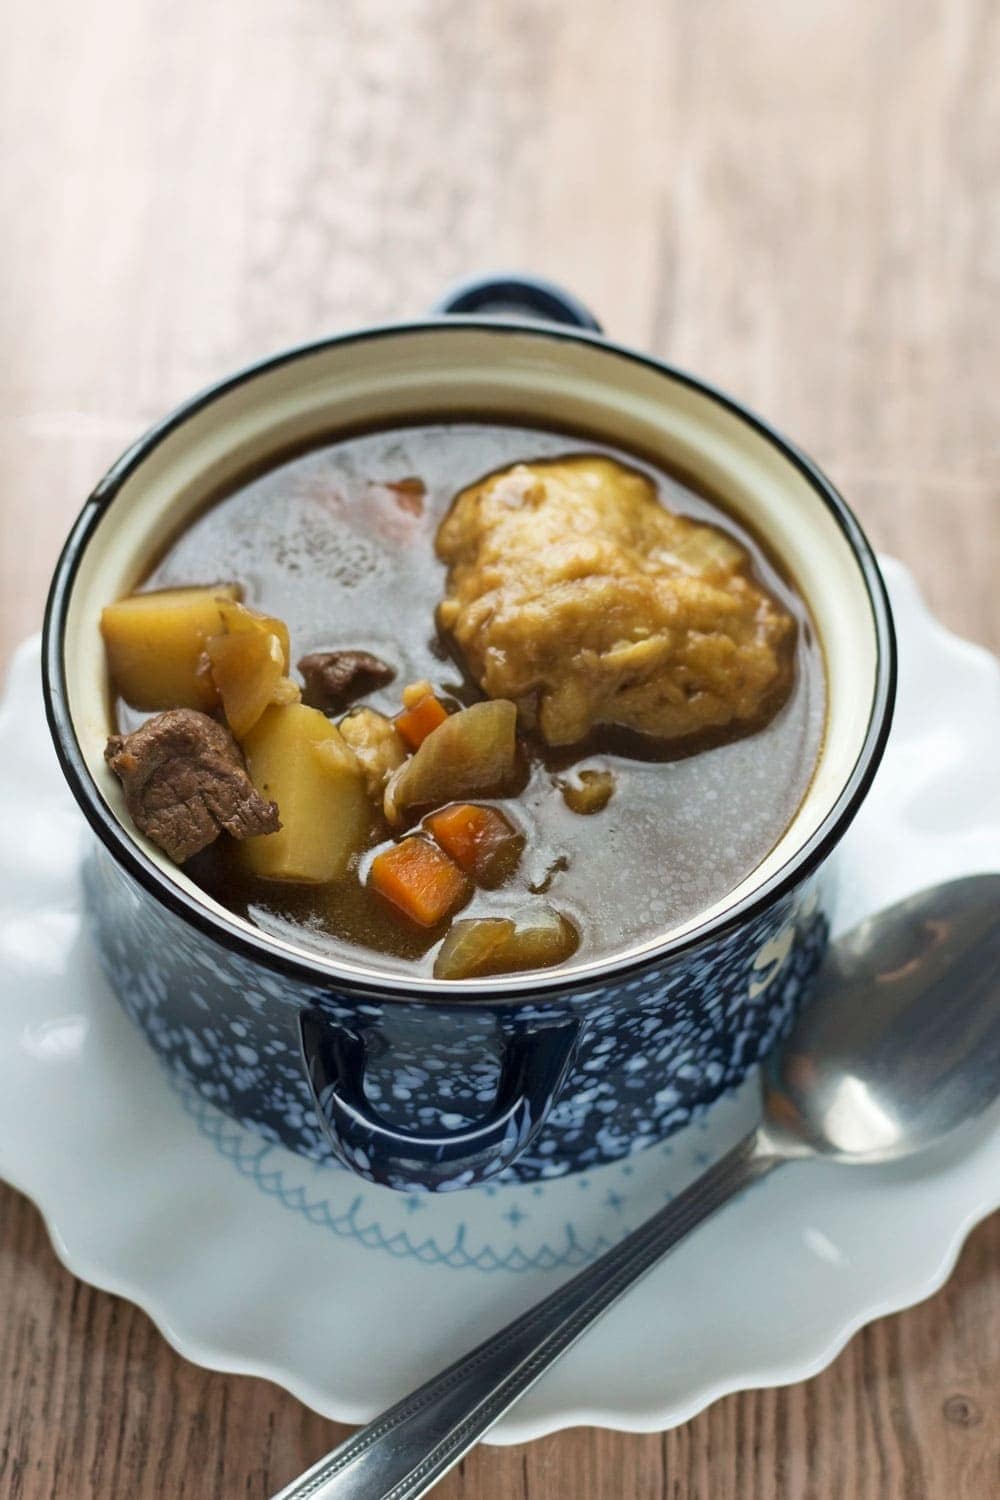 Beef vegetable soup with dumplings is super comforting & the perfect recipe for a Sunday treat. It's flavoured with rosemary & hearty from the potatoes.